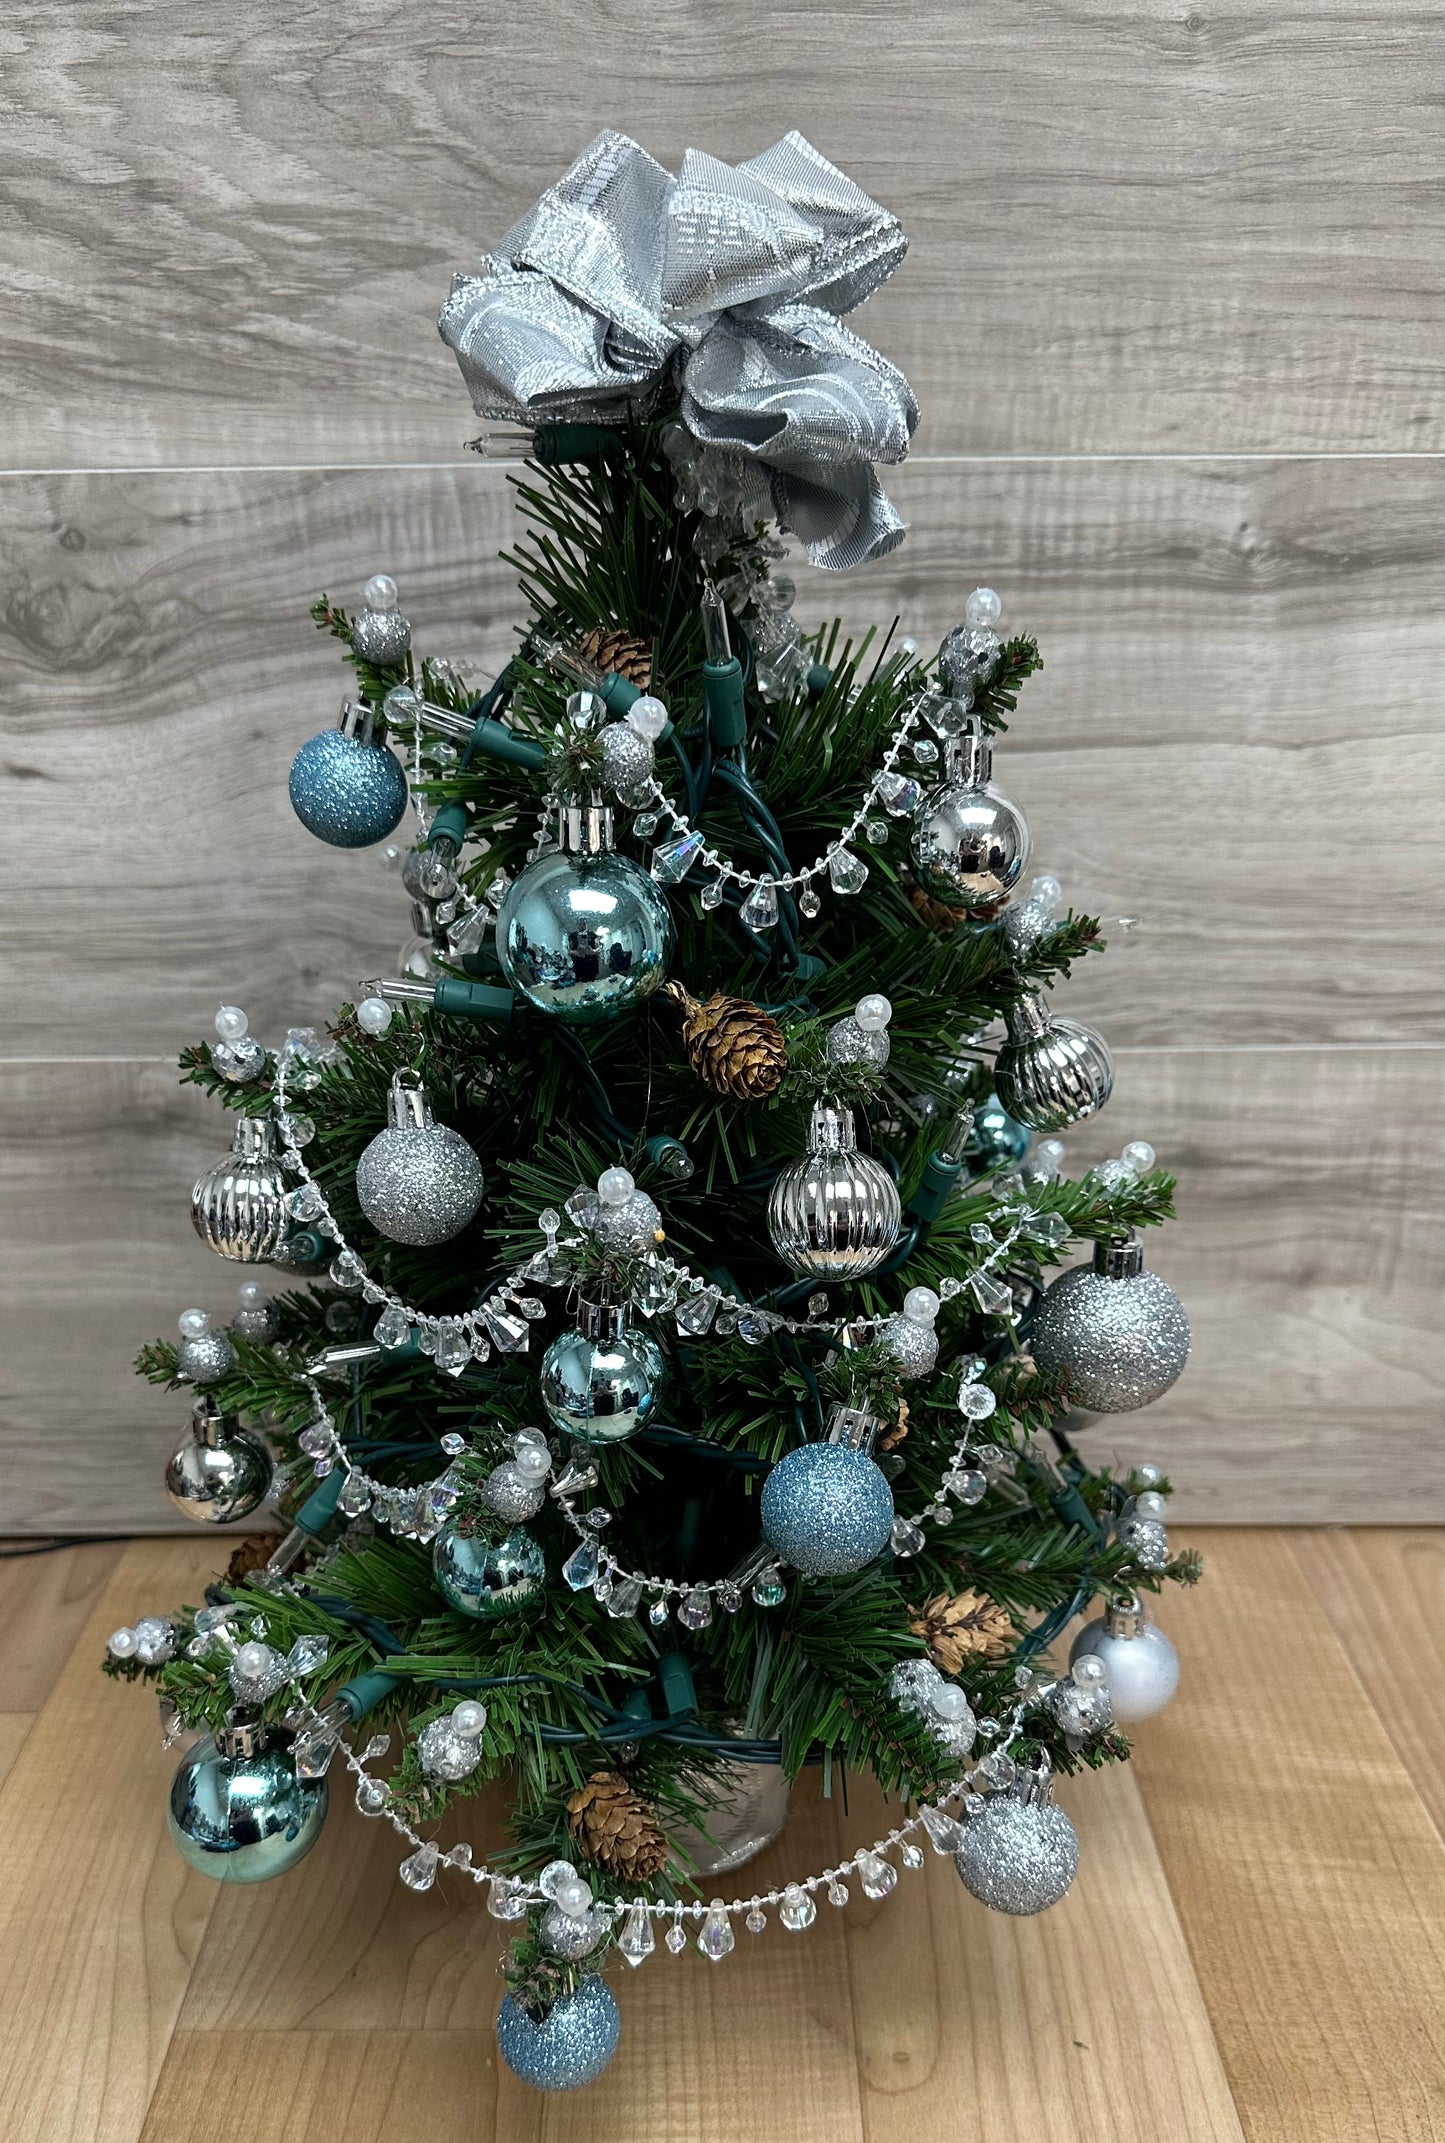 18” Mini lighted Christmas Tree with silver and blue ornaments made by hand